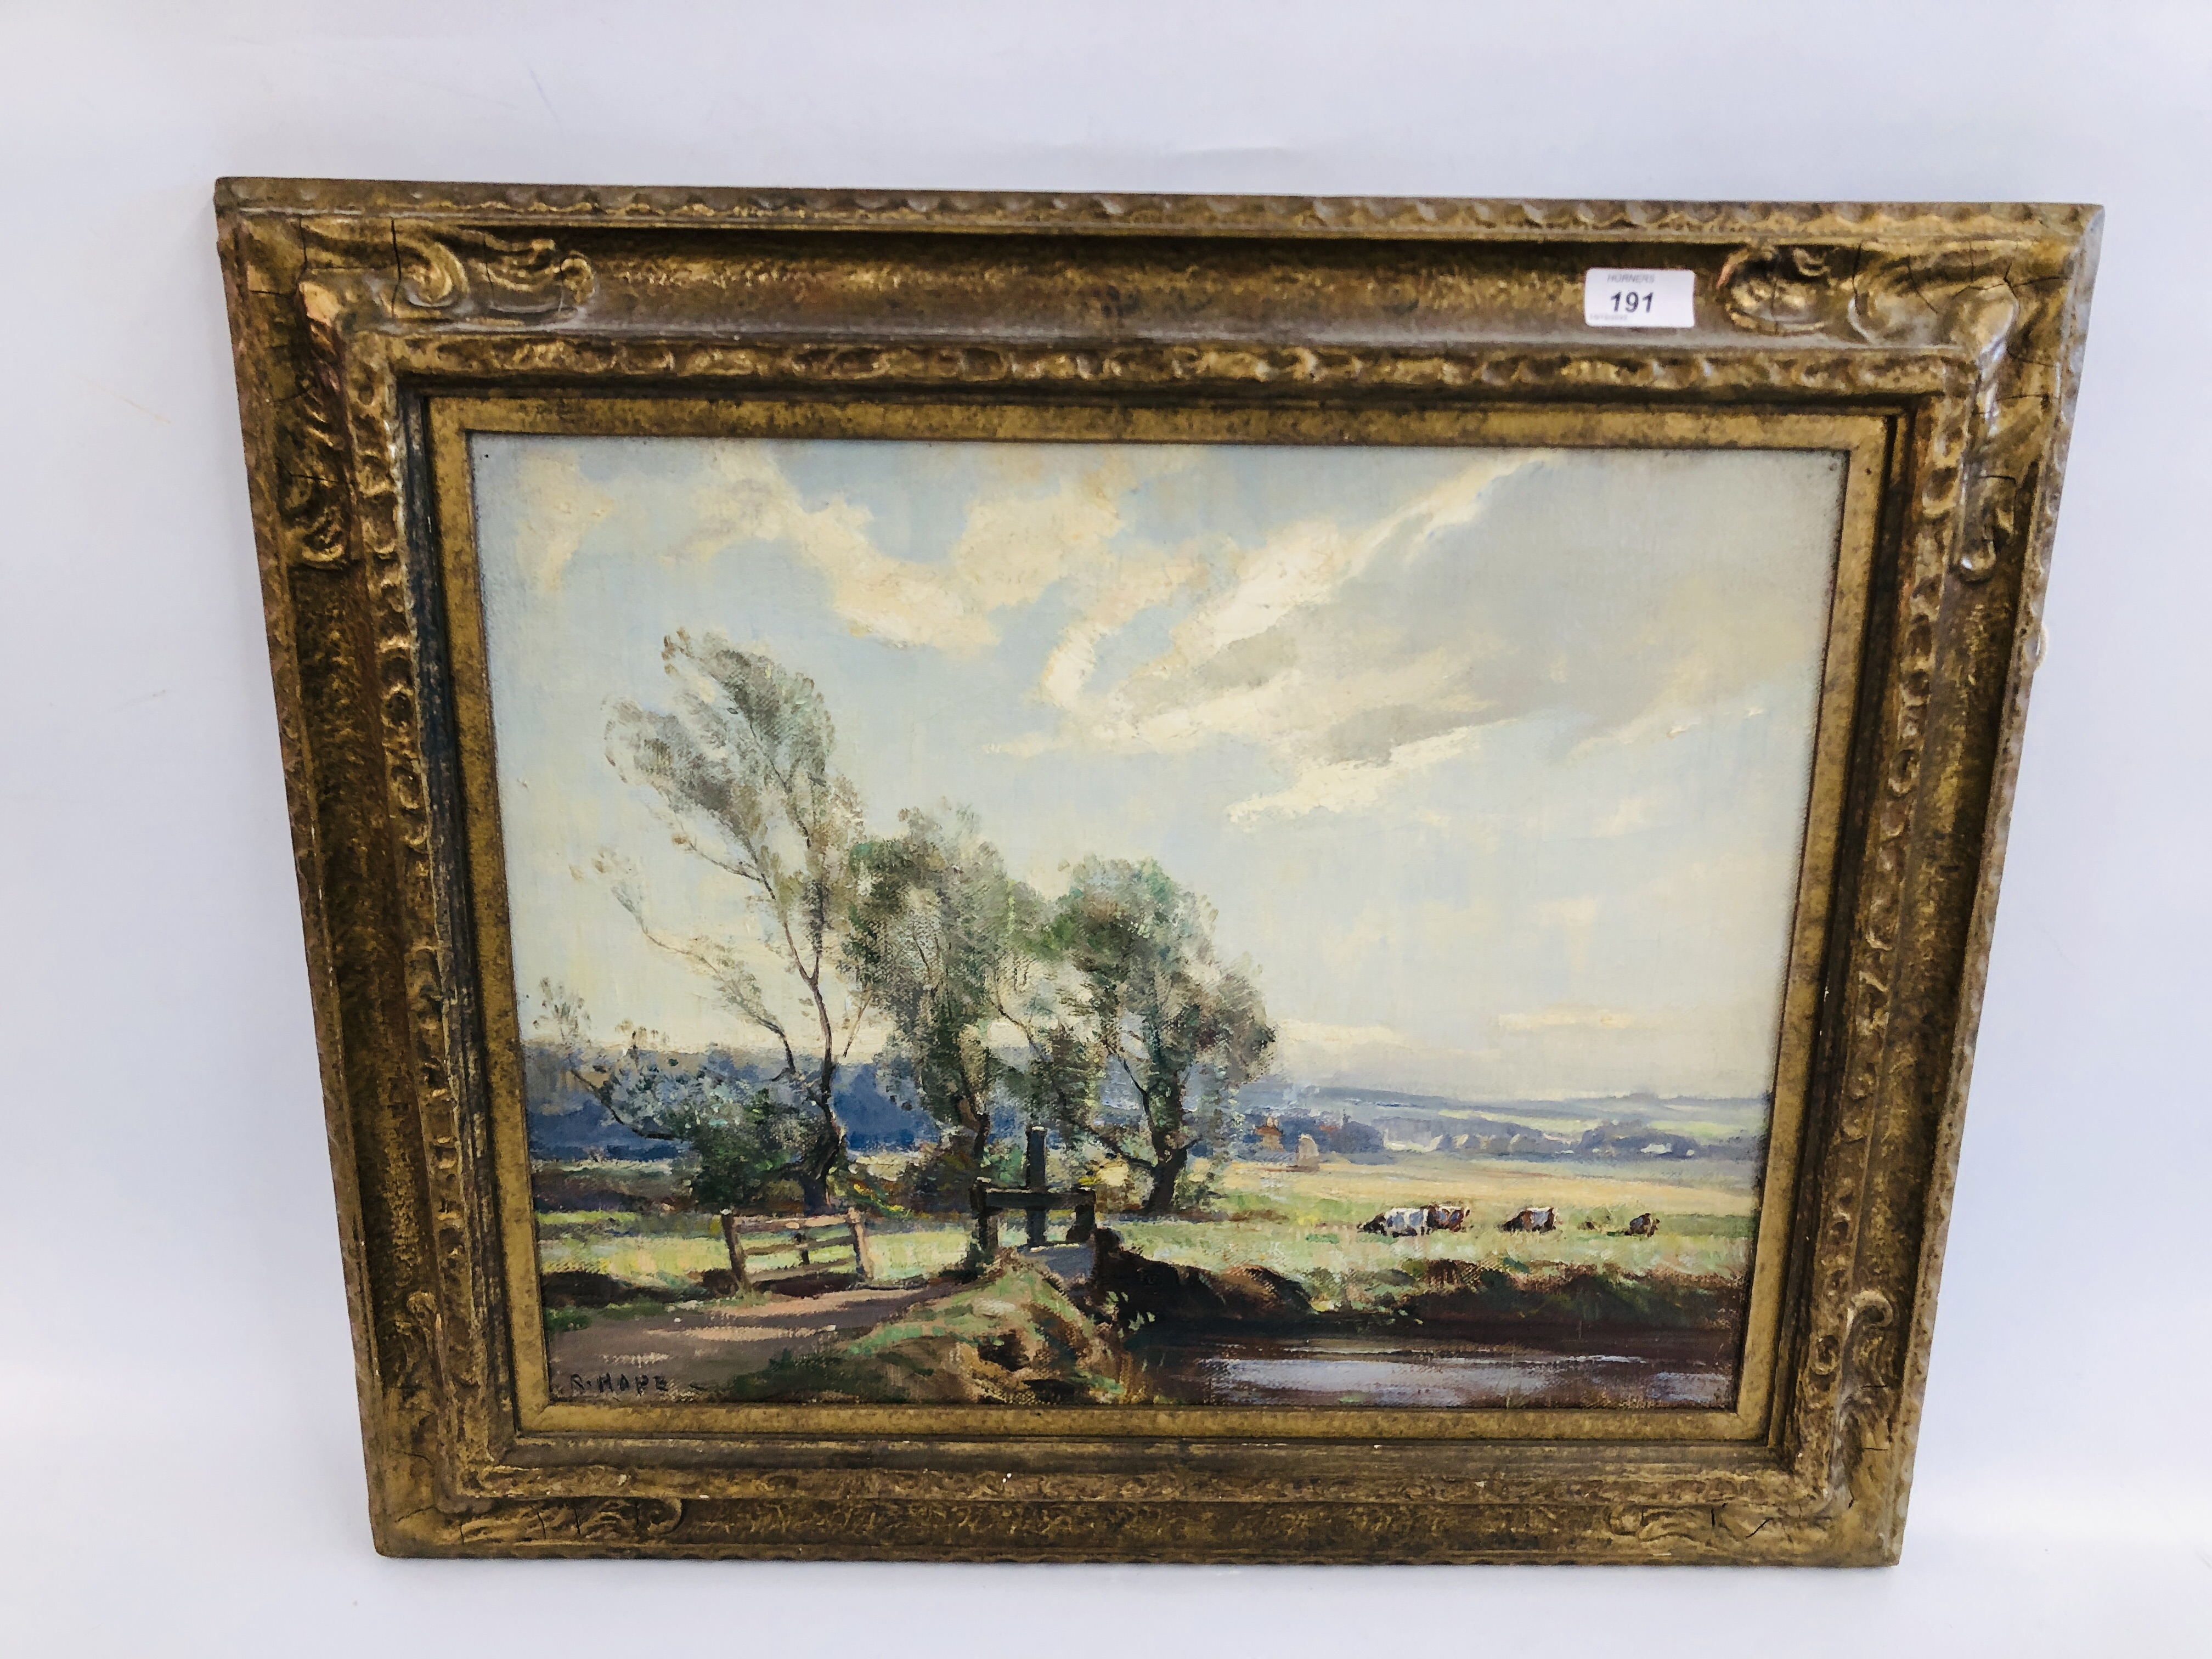 OIL ON CANVAS, LANDSCAPE WITH RIVER AND CATTLE BEARING SIGNATURE R.HOPE, 39.5CM X 49.5CM.